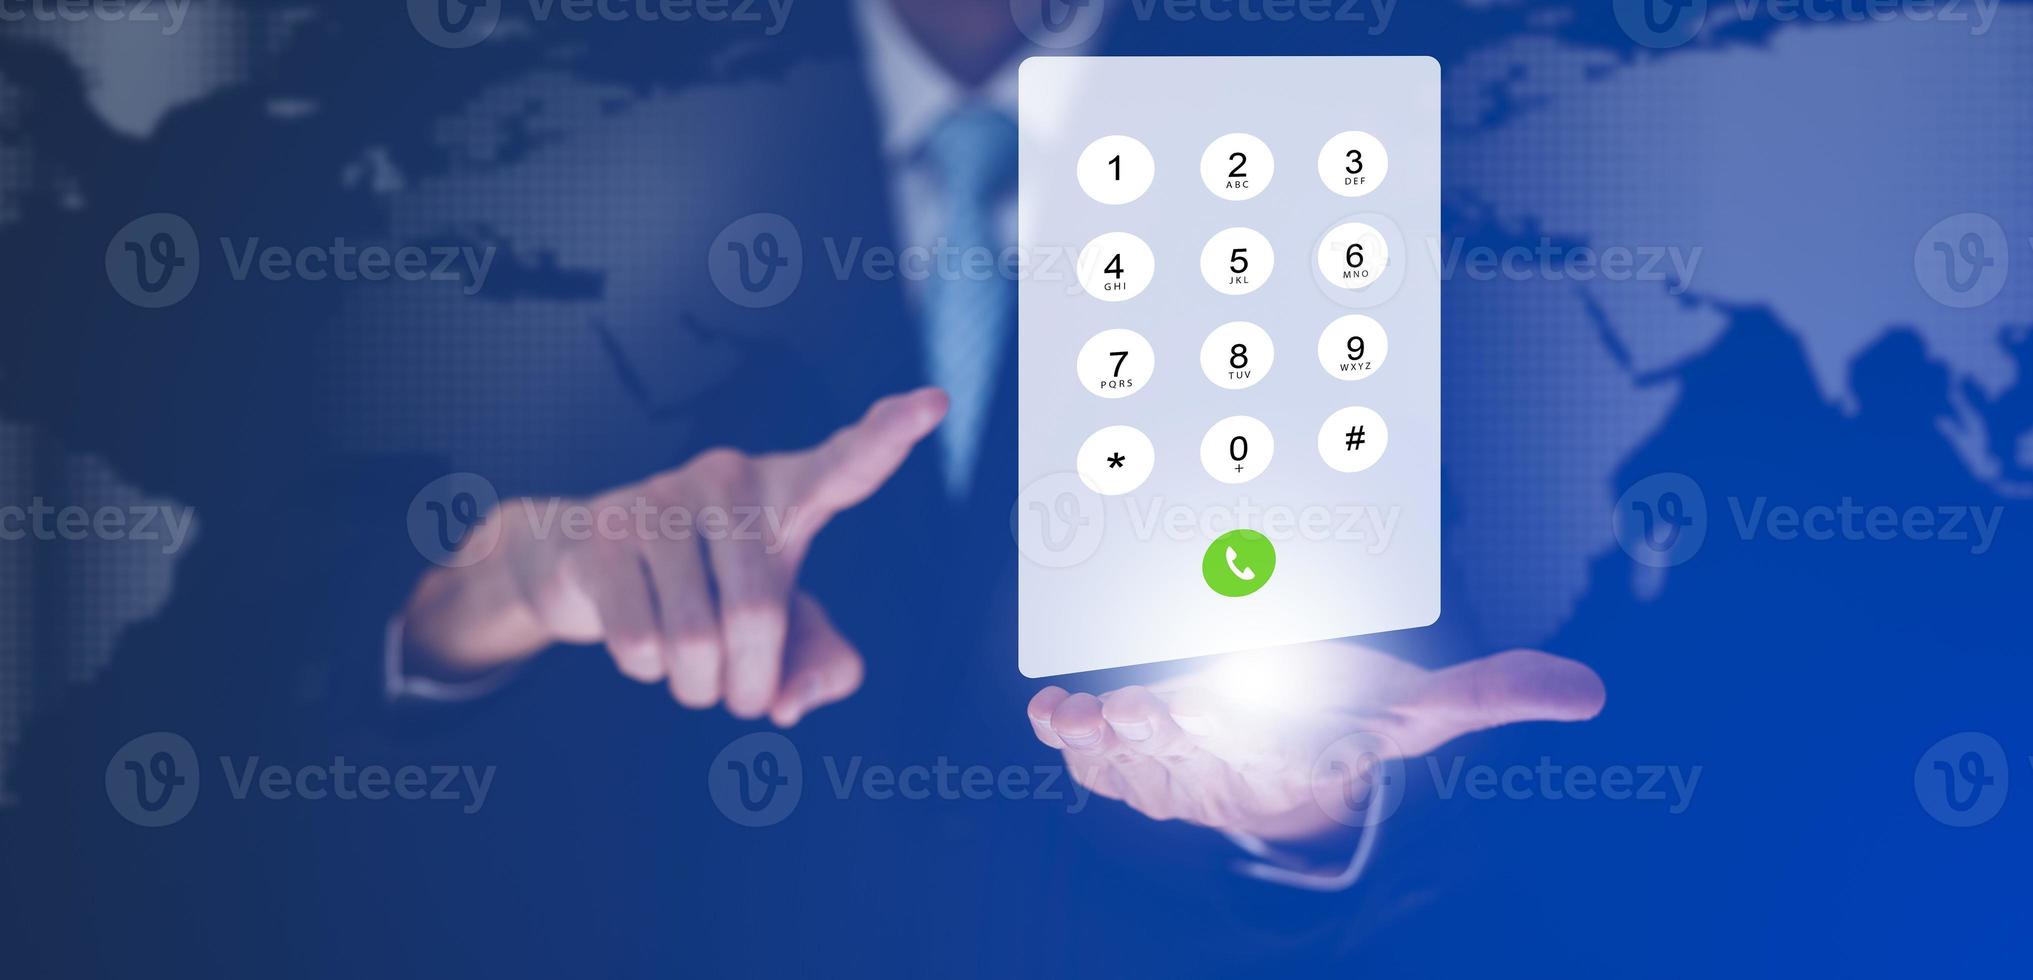 Dialing on virtual telephone keypad with transparent telephone buttons, businessman touch button of telephone number on screen, Finger touch number on smartphone to make a call, close up, photo